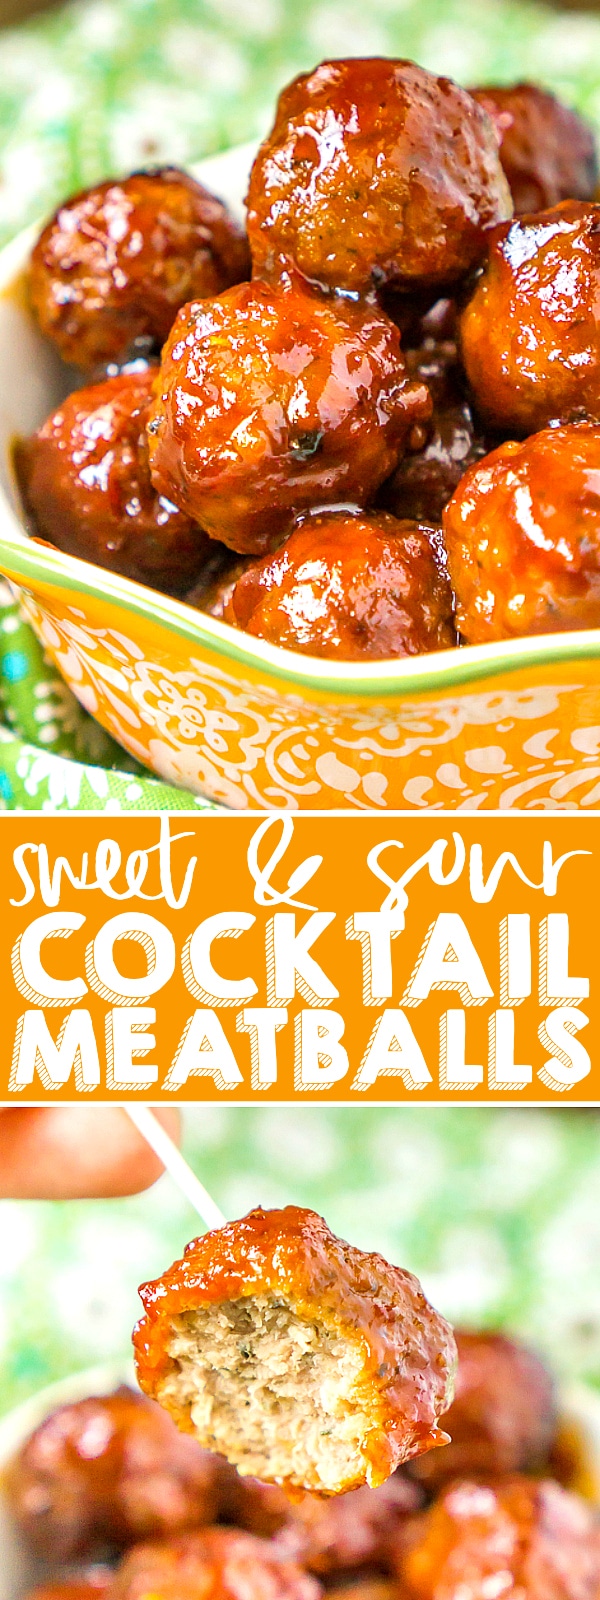 Slow Cooker Sweet and Sour Meatballs is one of the easiest cocktail meatball recipes you can make! With only 6 ingredients needed and under 10 minutes of prep work, these make the perfect holiday app or game day food. Plus we even love them for an easy dinner idea! | THE LOVE NERDS #meatballrecipe #holidayappetizer #gamedayfood